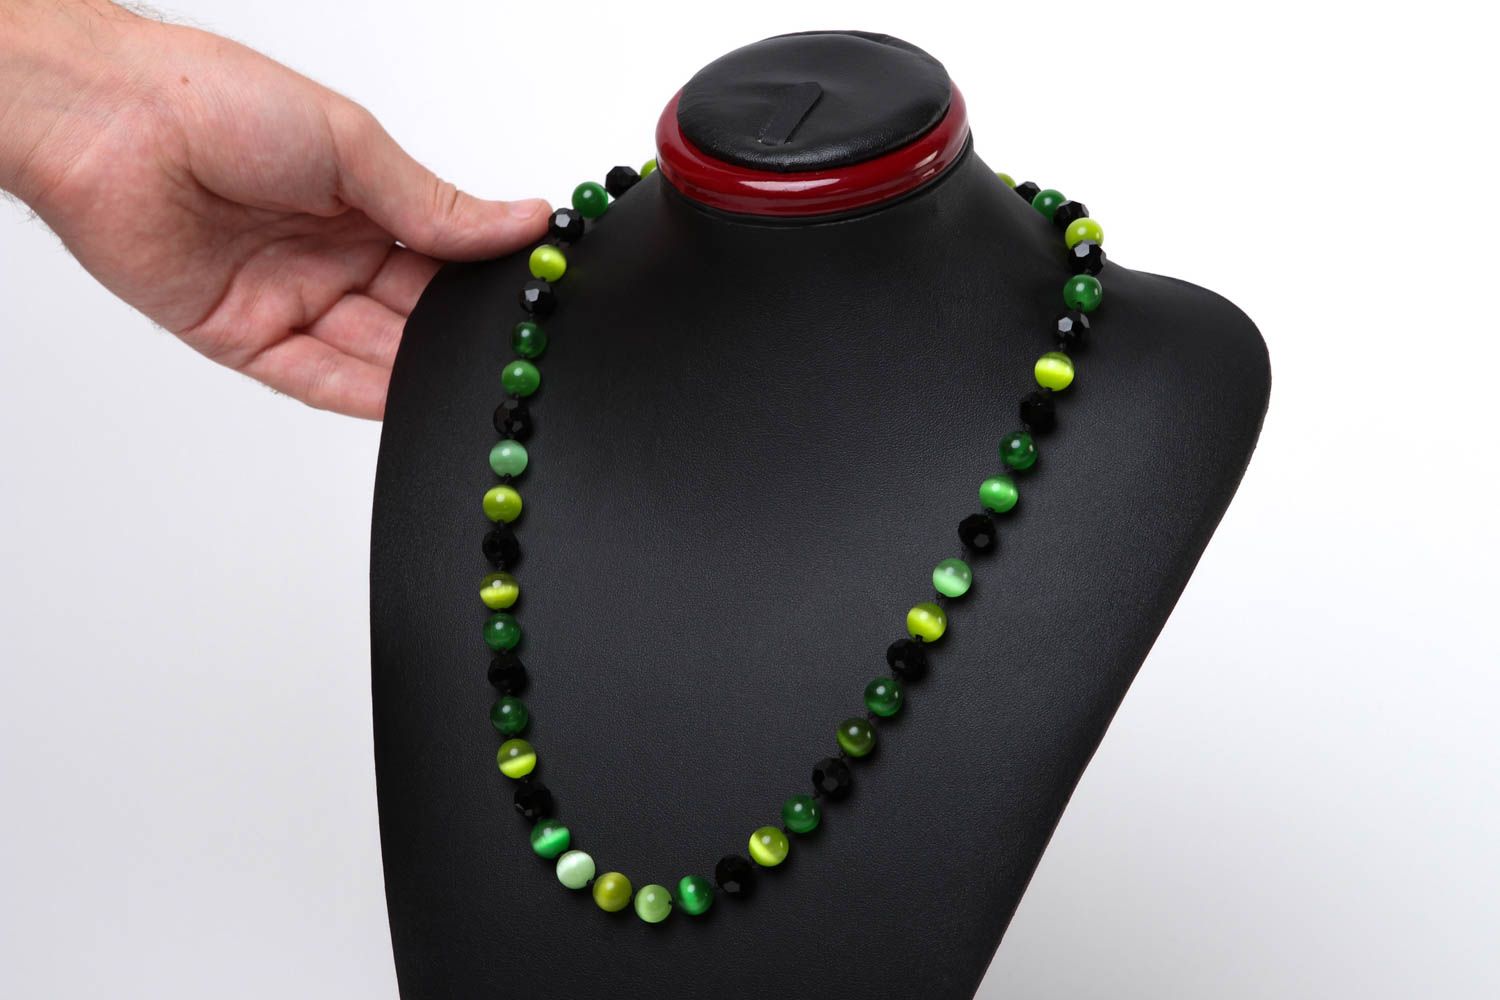 Handmade bead necklace elite jewelry gift for her unusual necklace gift ideas photo 5